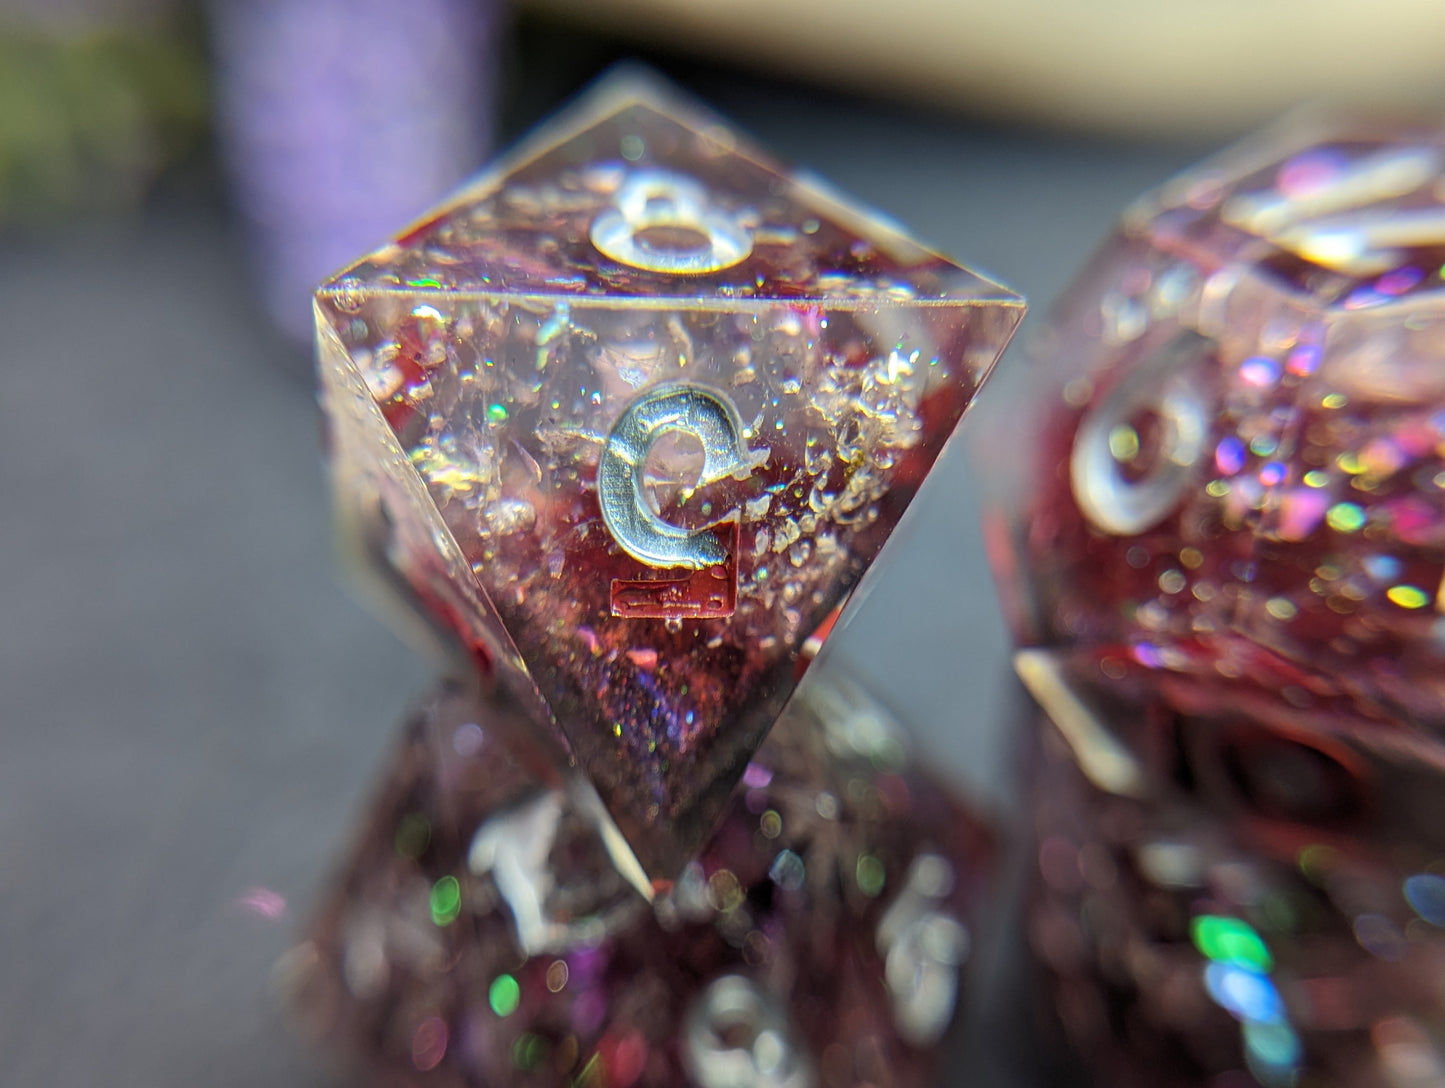 The Fall of Silver Handmade Dice Set